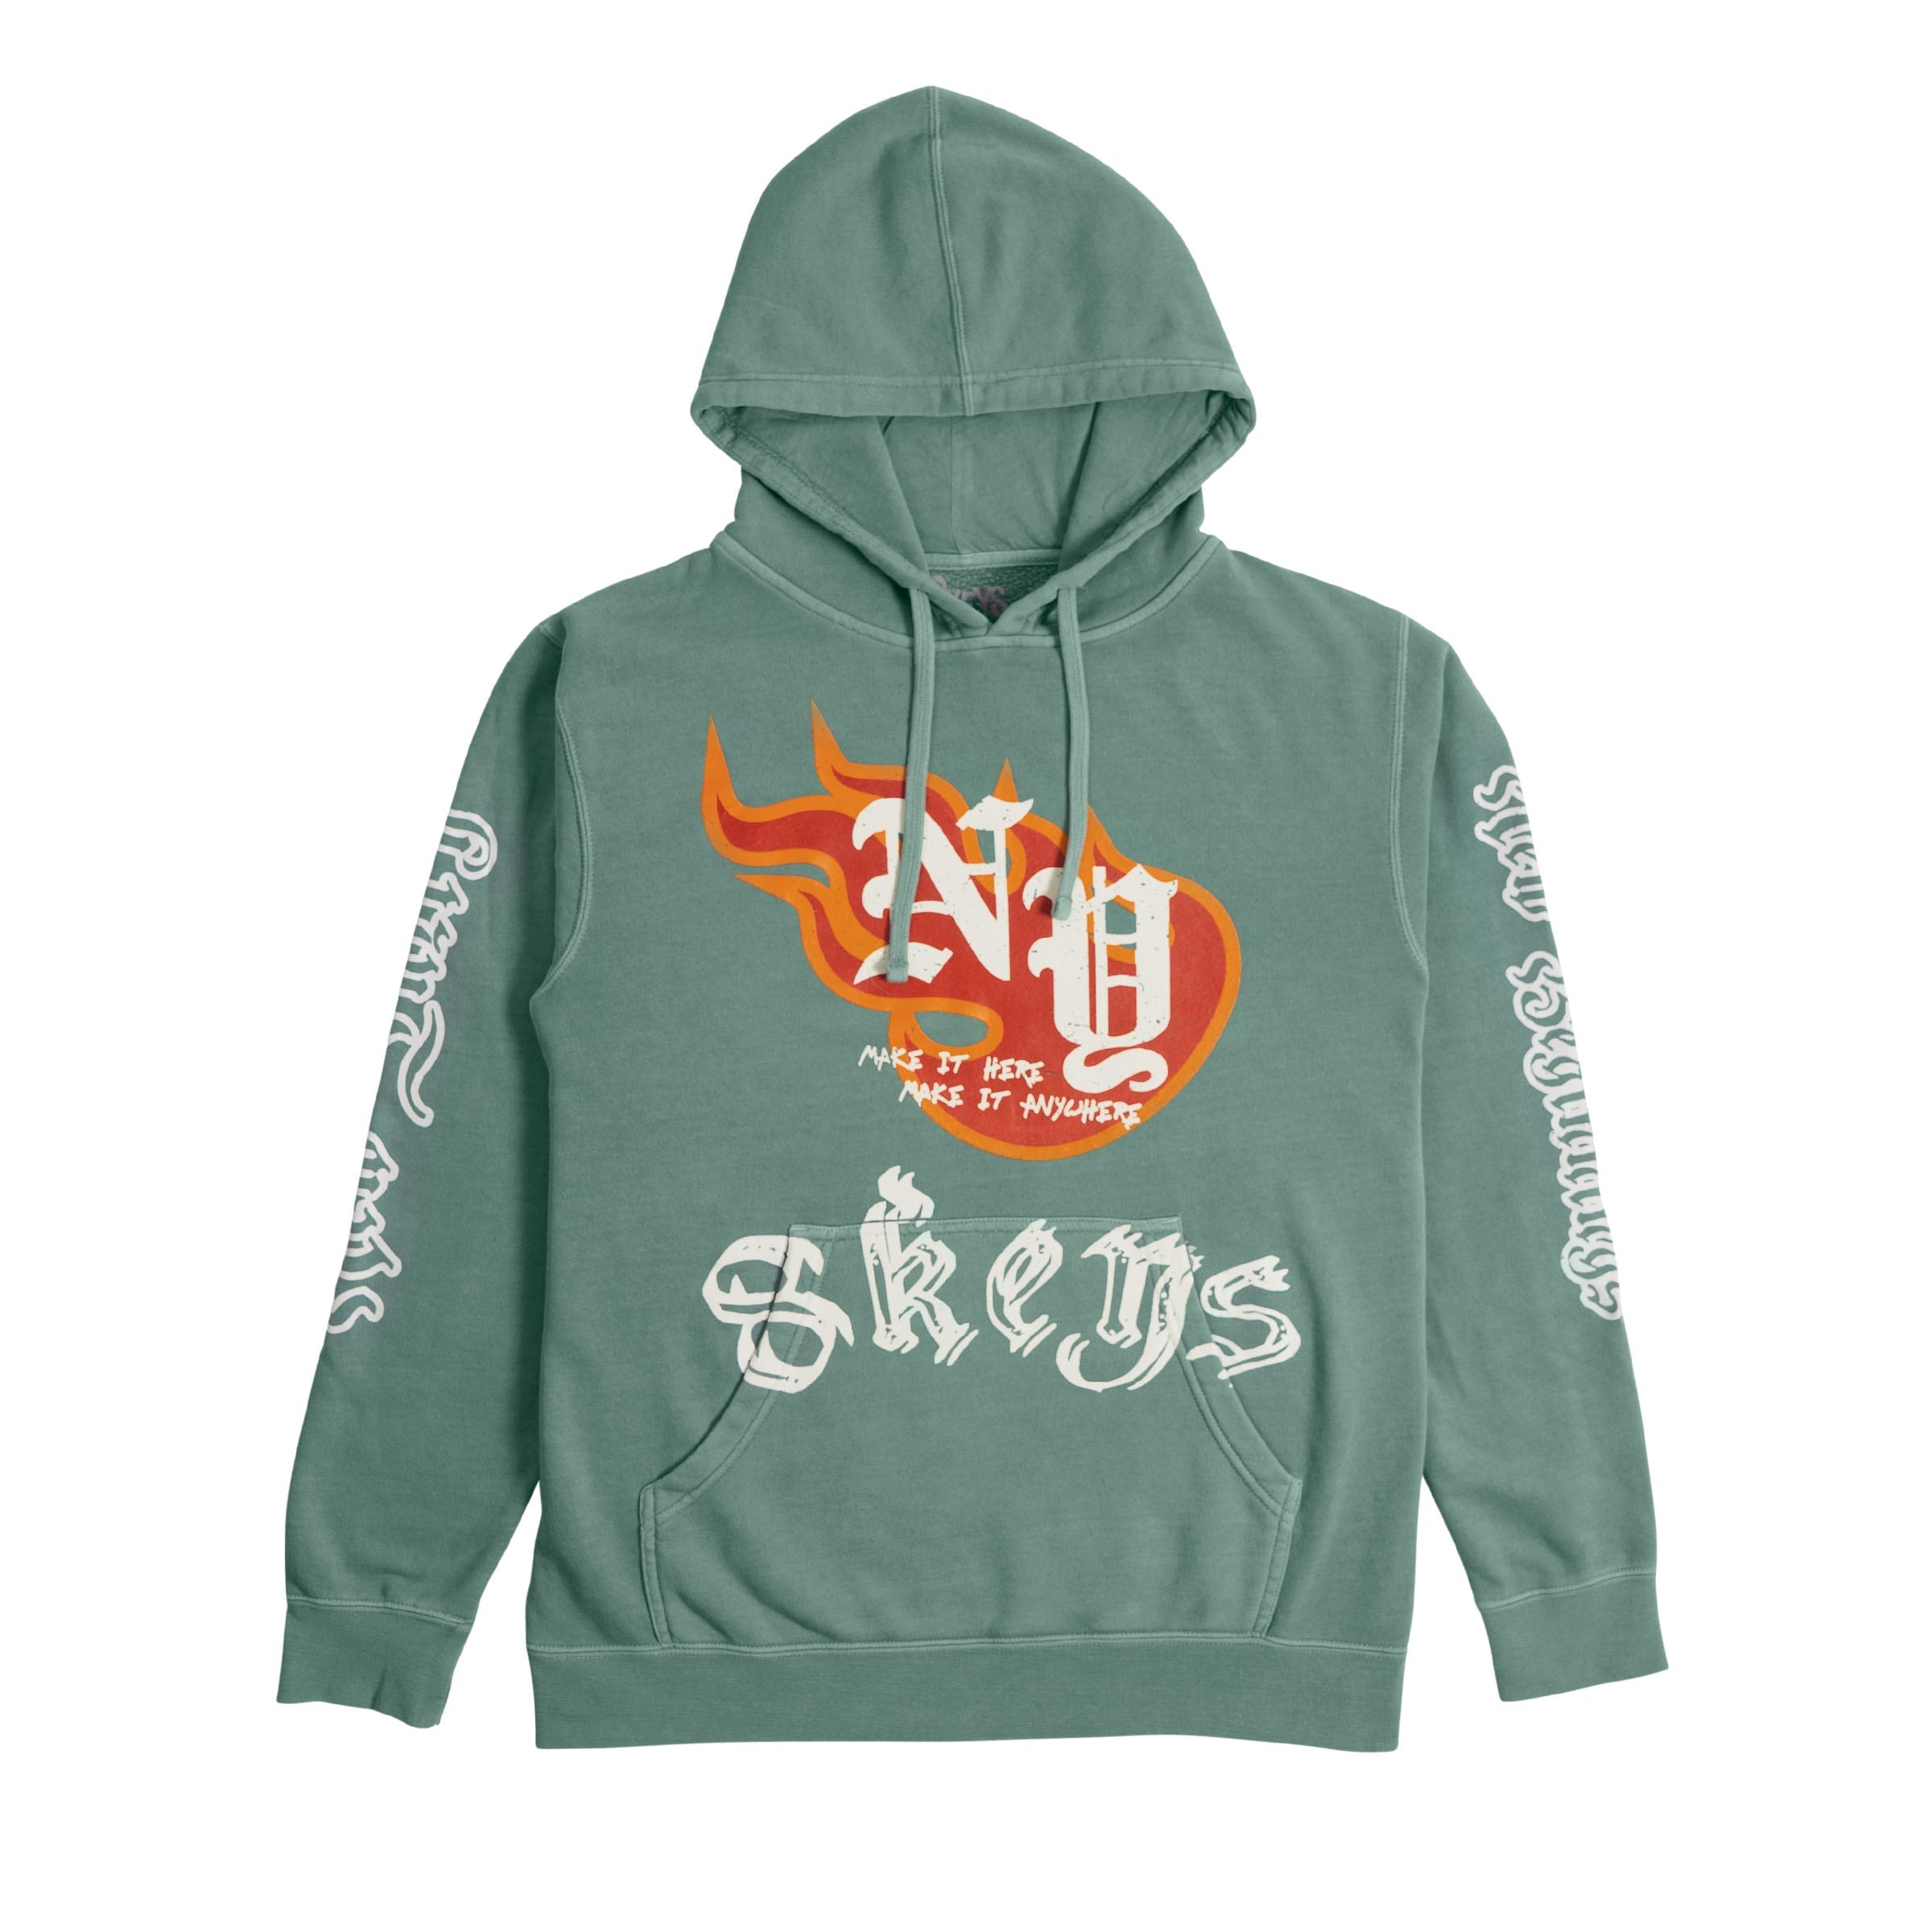 Mint green locals only hoody